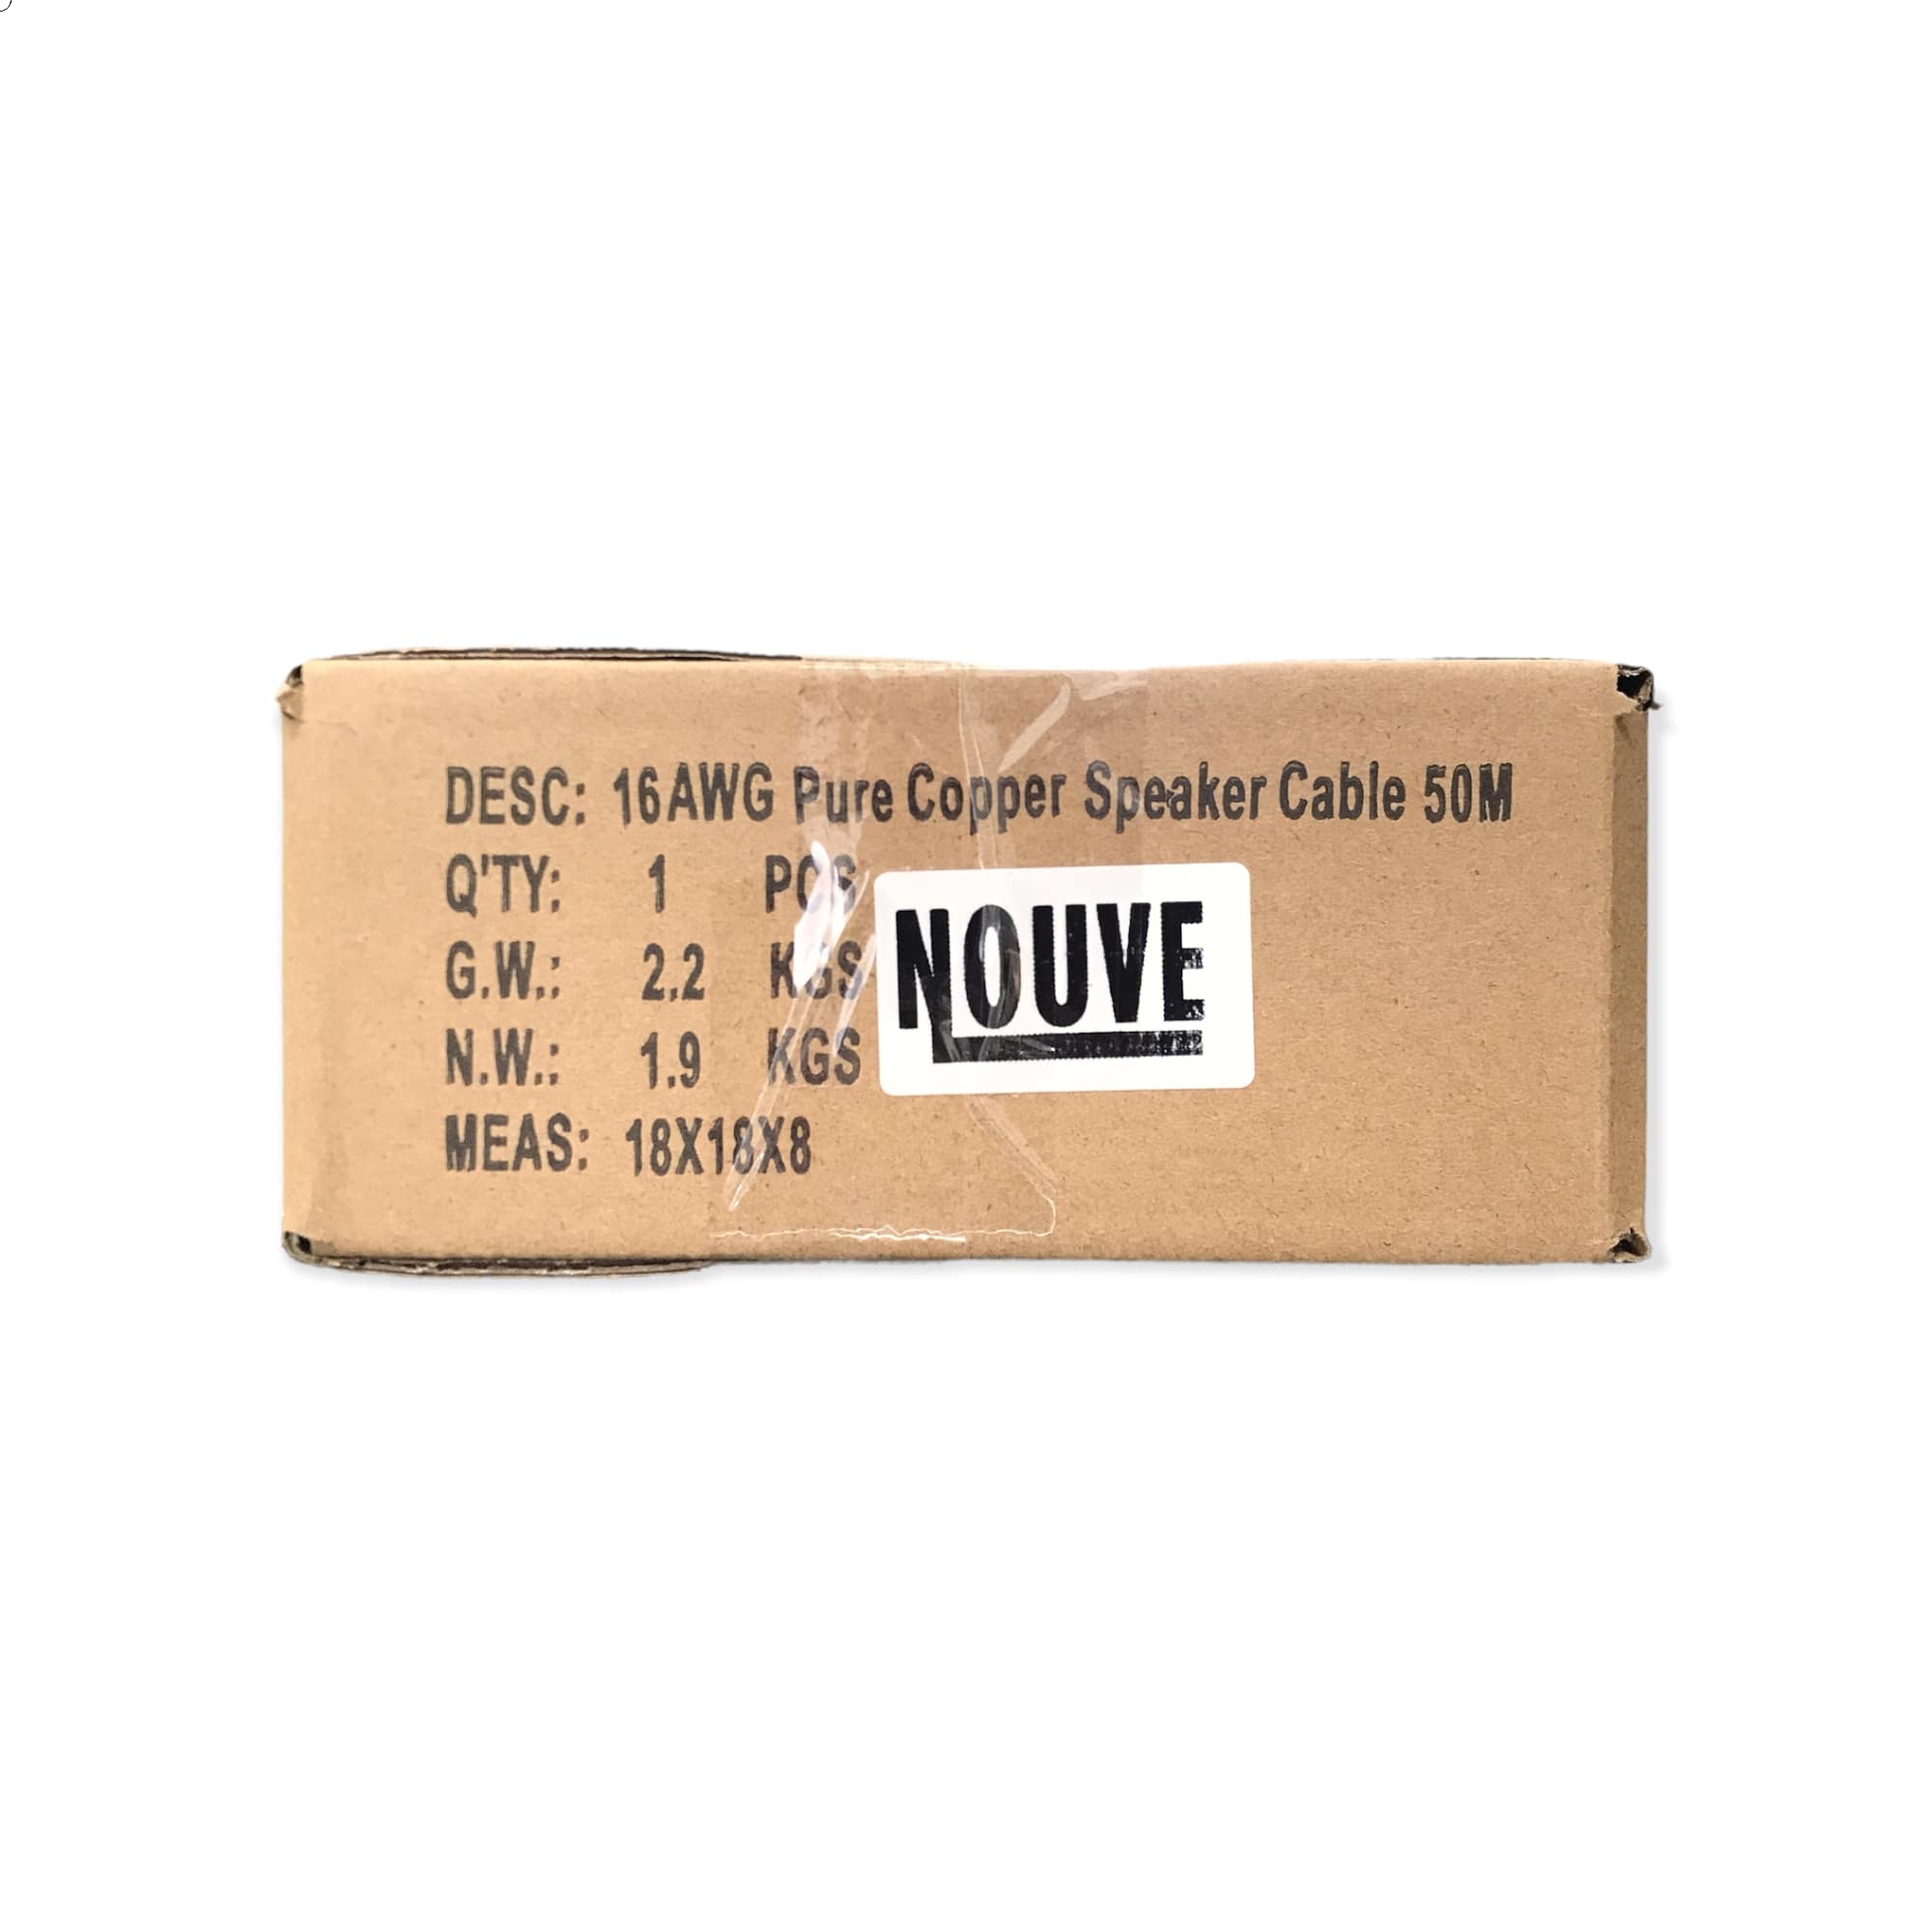 16 awg speaker cable nouve box